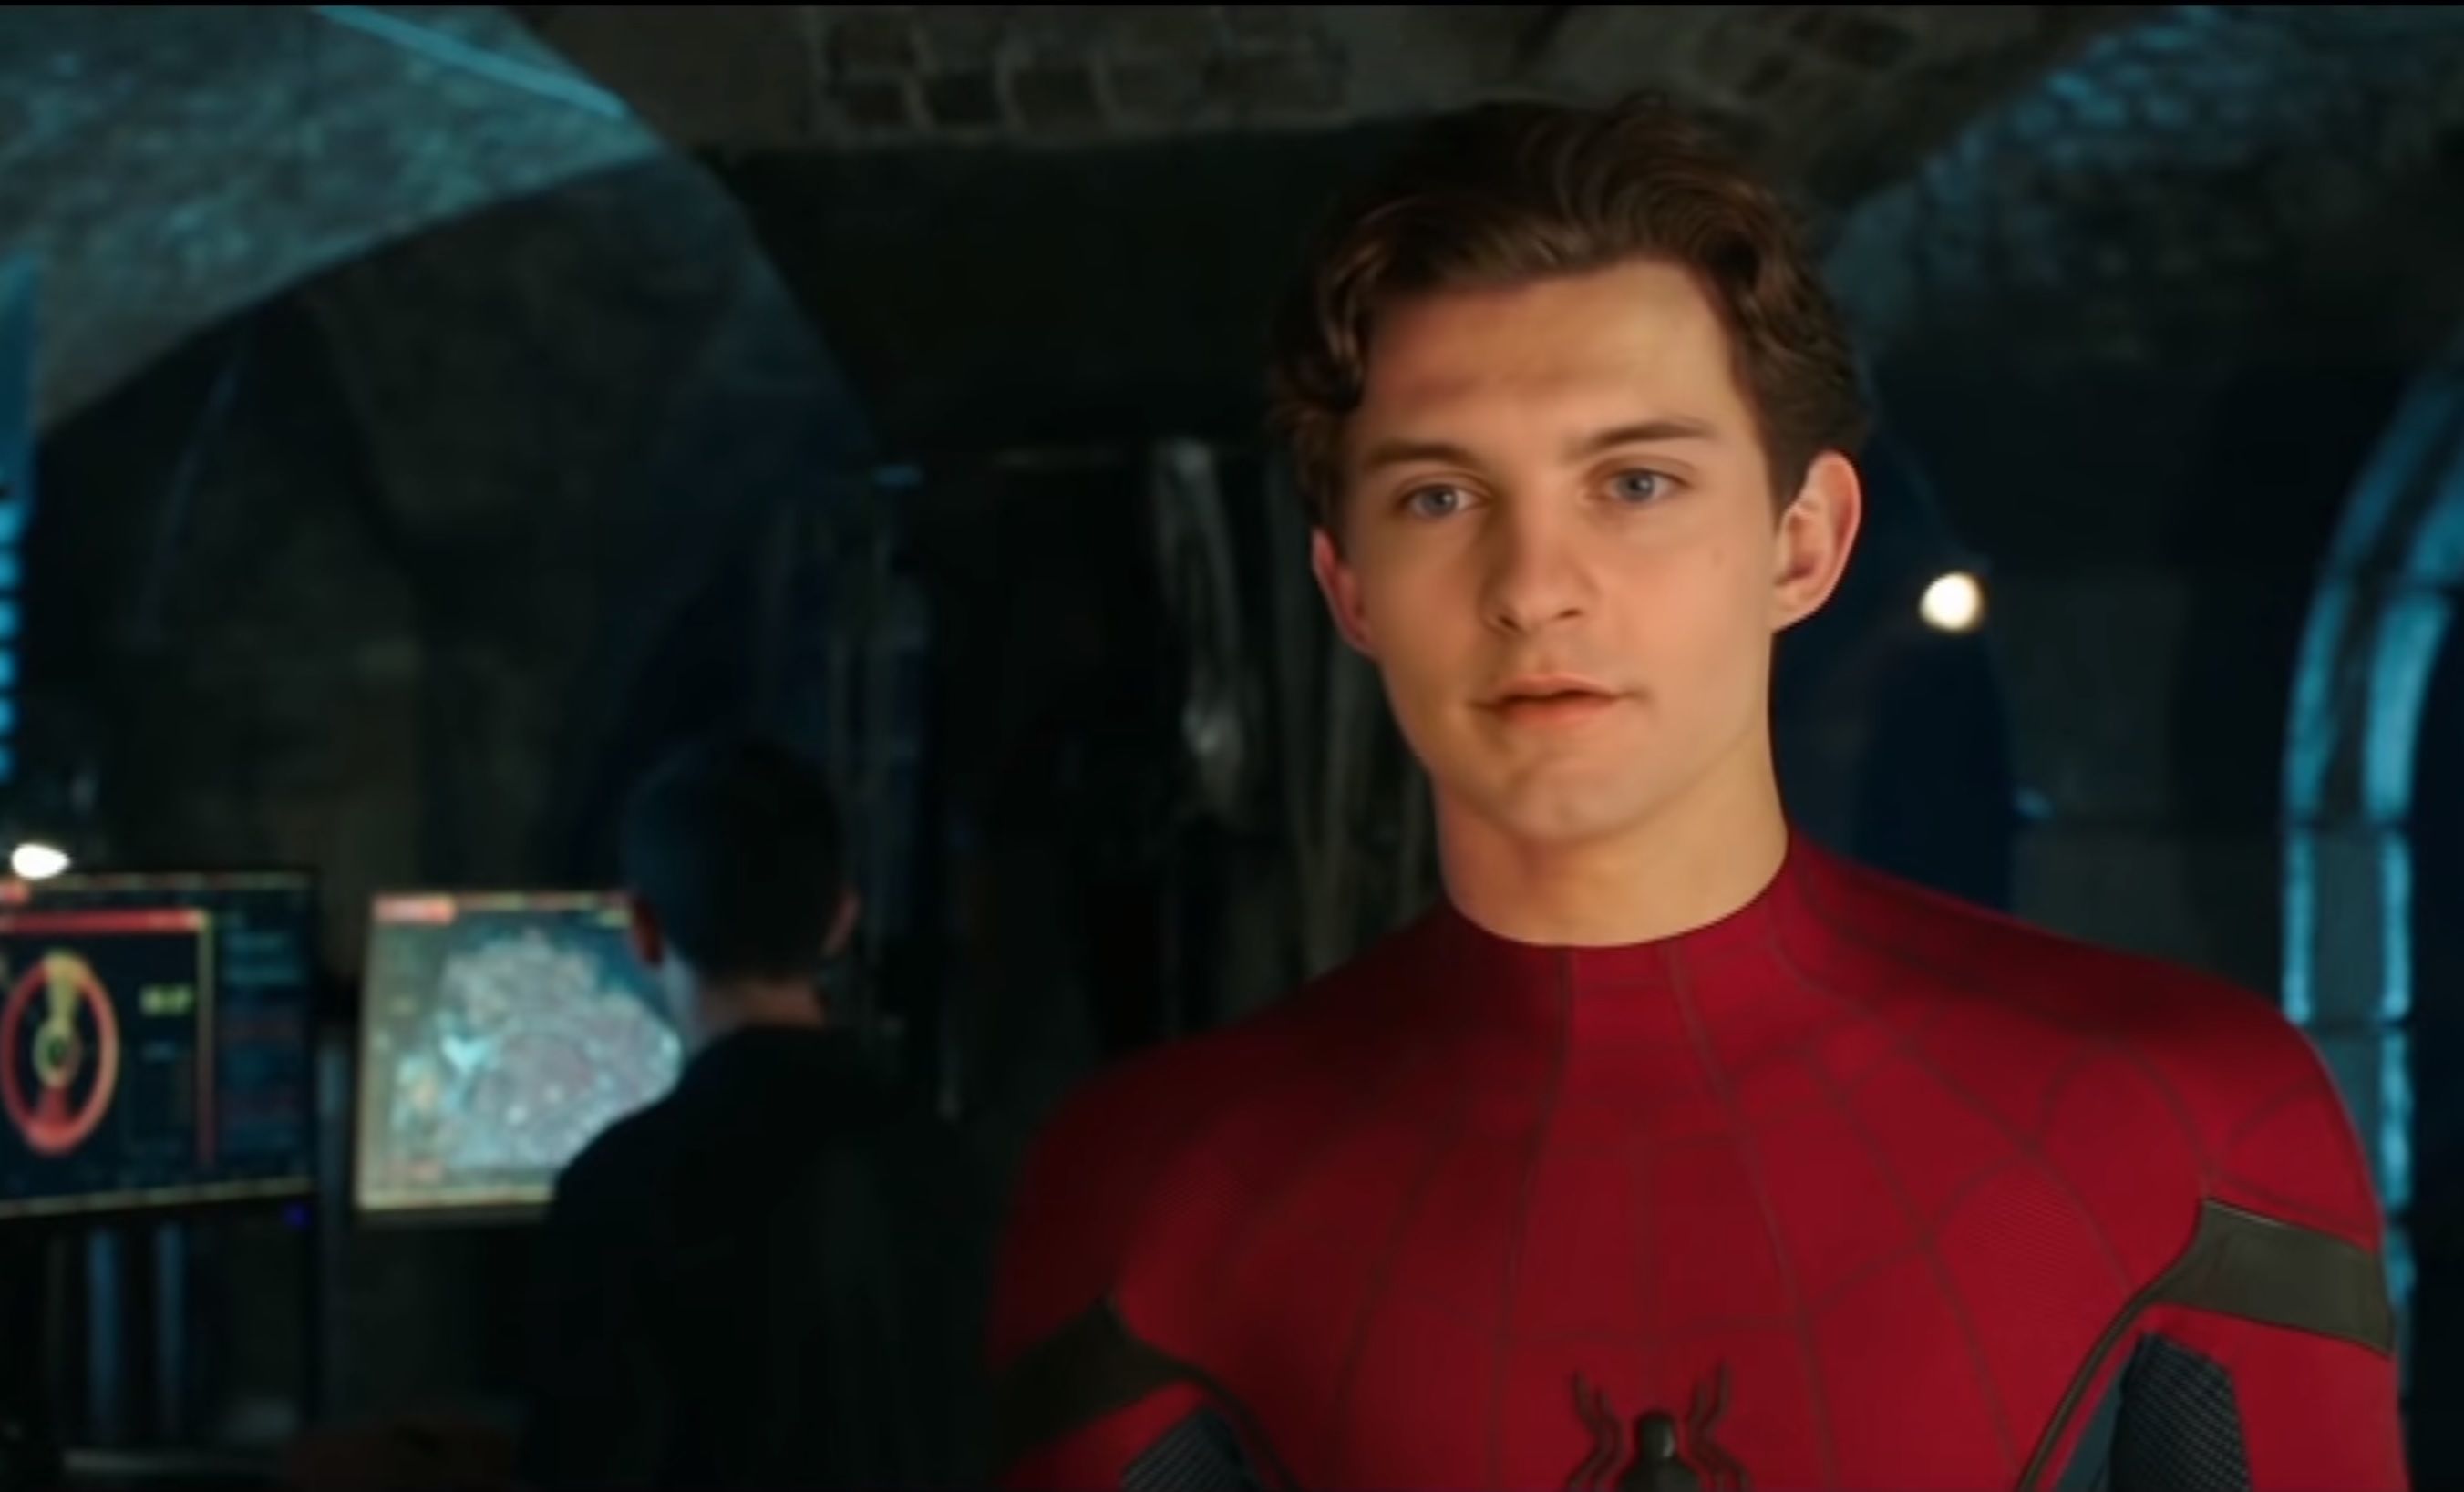 Spider-Man Far From Home spoof trailer with Tobey Maguire